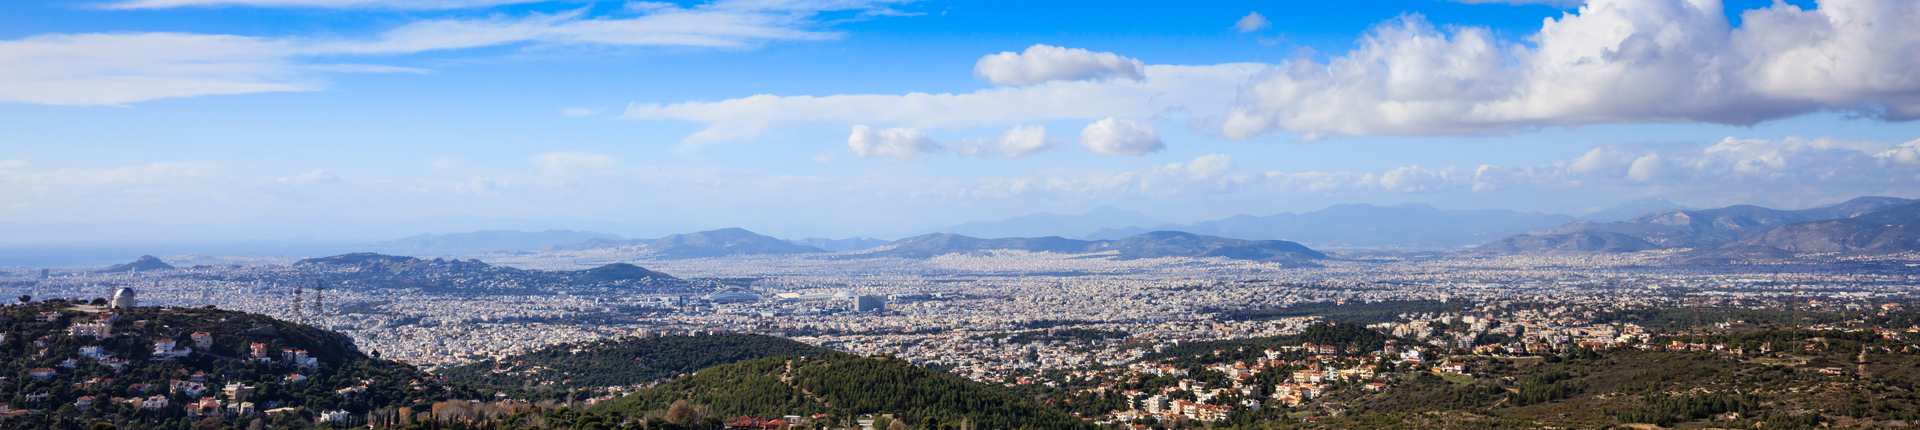 Greece, Athens. Panoramic view on blue sky background